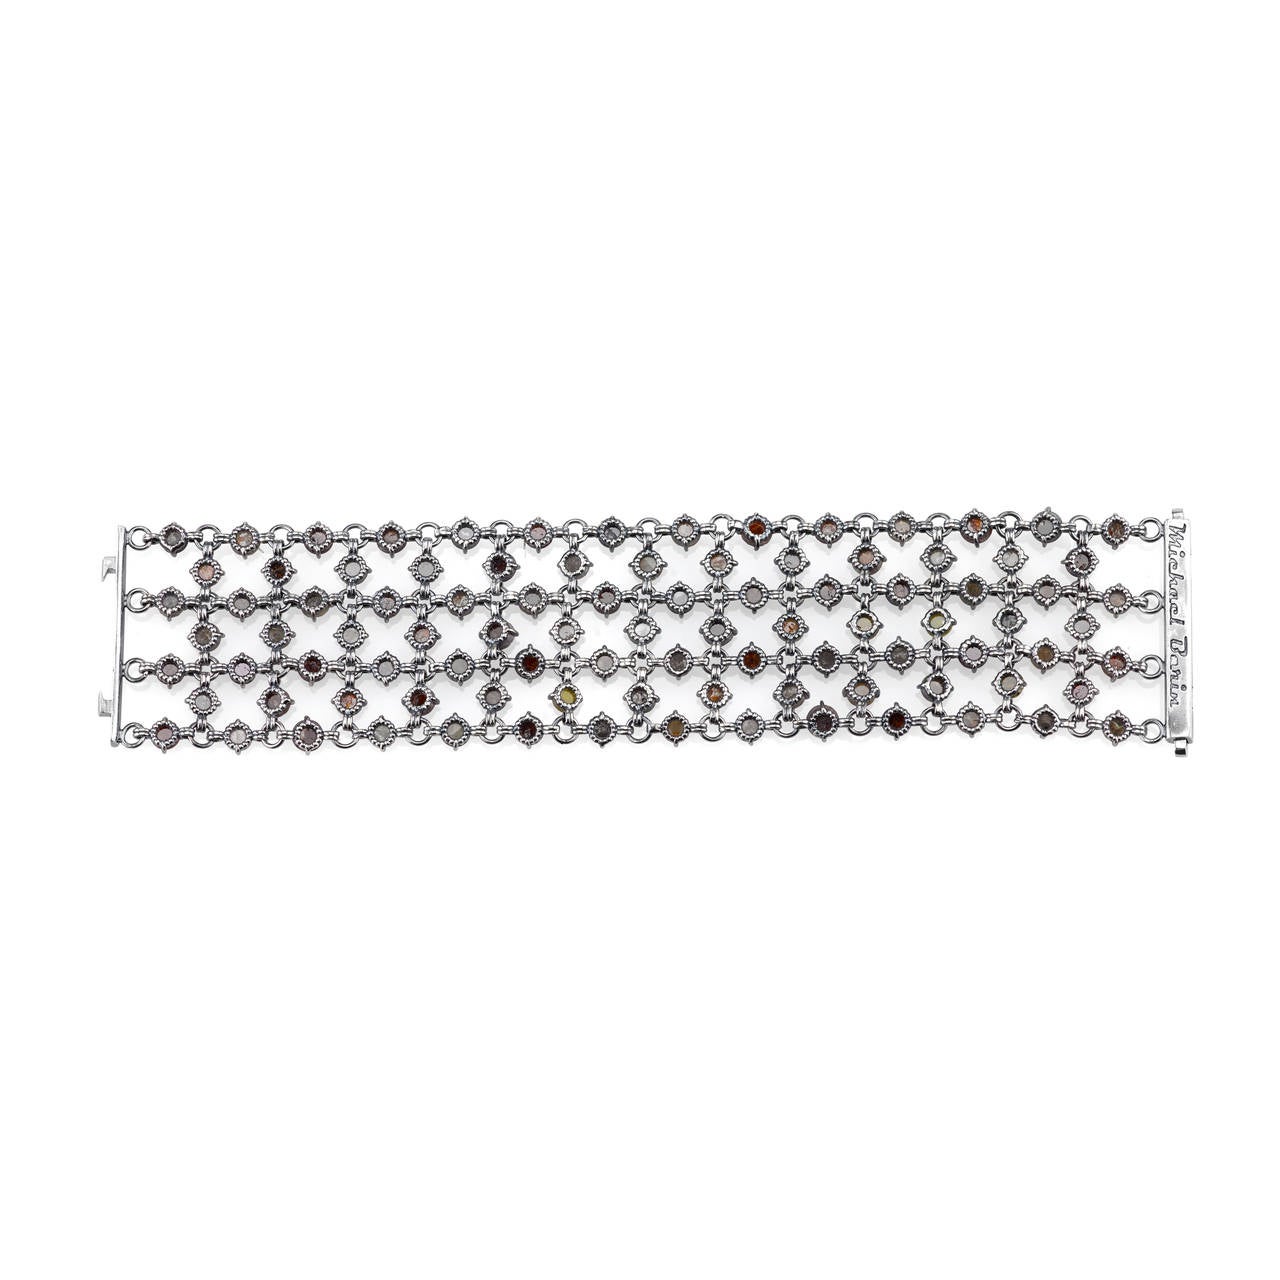 This beautiful bracelet has both modern and traditional elements. Earthy rustic diamonds, a trendy twist on neutrals, pair wonderfully with the muted tones of Organic Silver. The hand-engraved design on the Organic Silver clasp does not go unnoticed